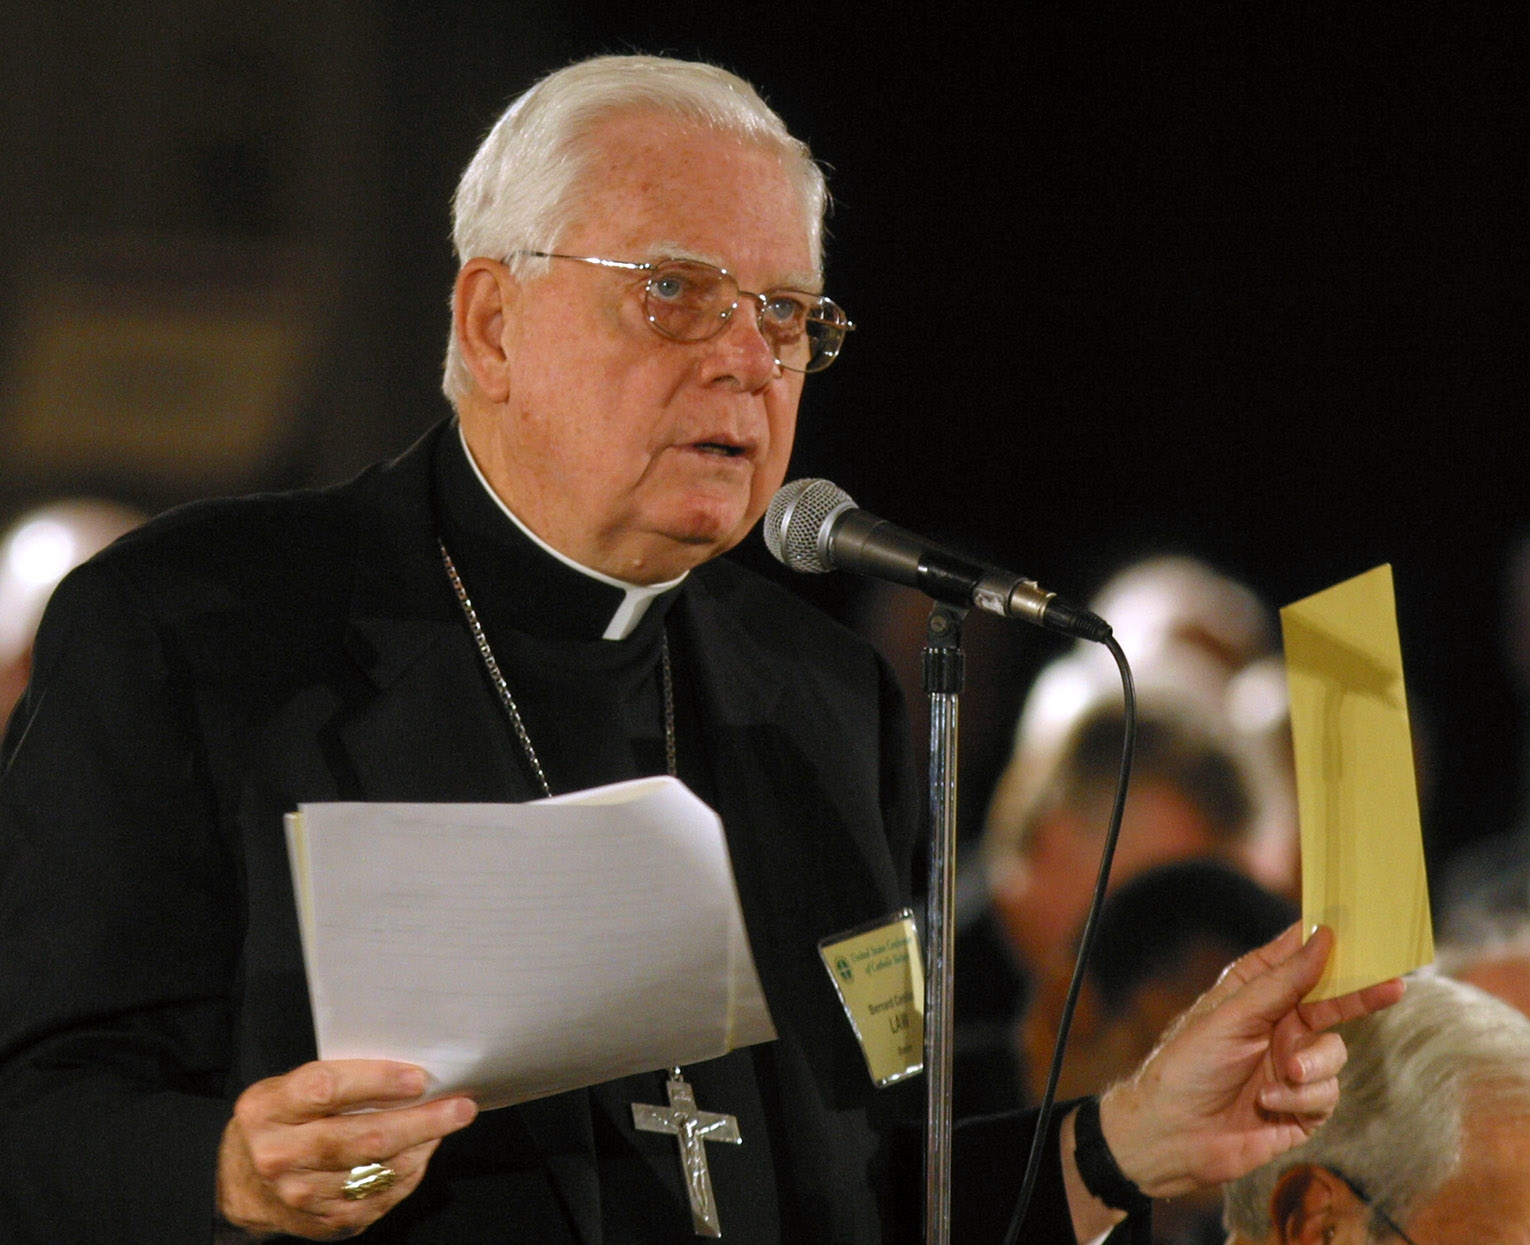 Cardinal Bernard Law holds papers and speaks at meeting of bishops.